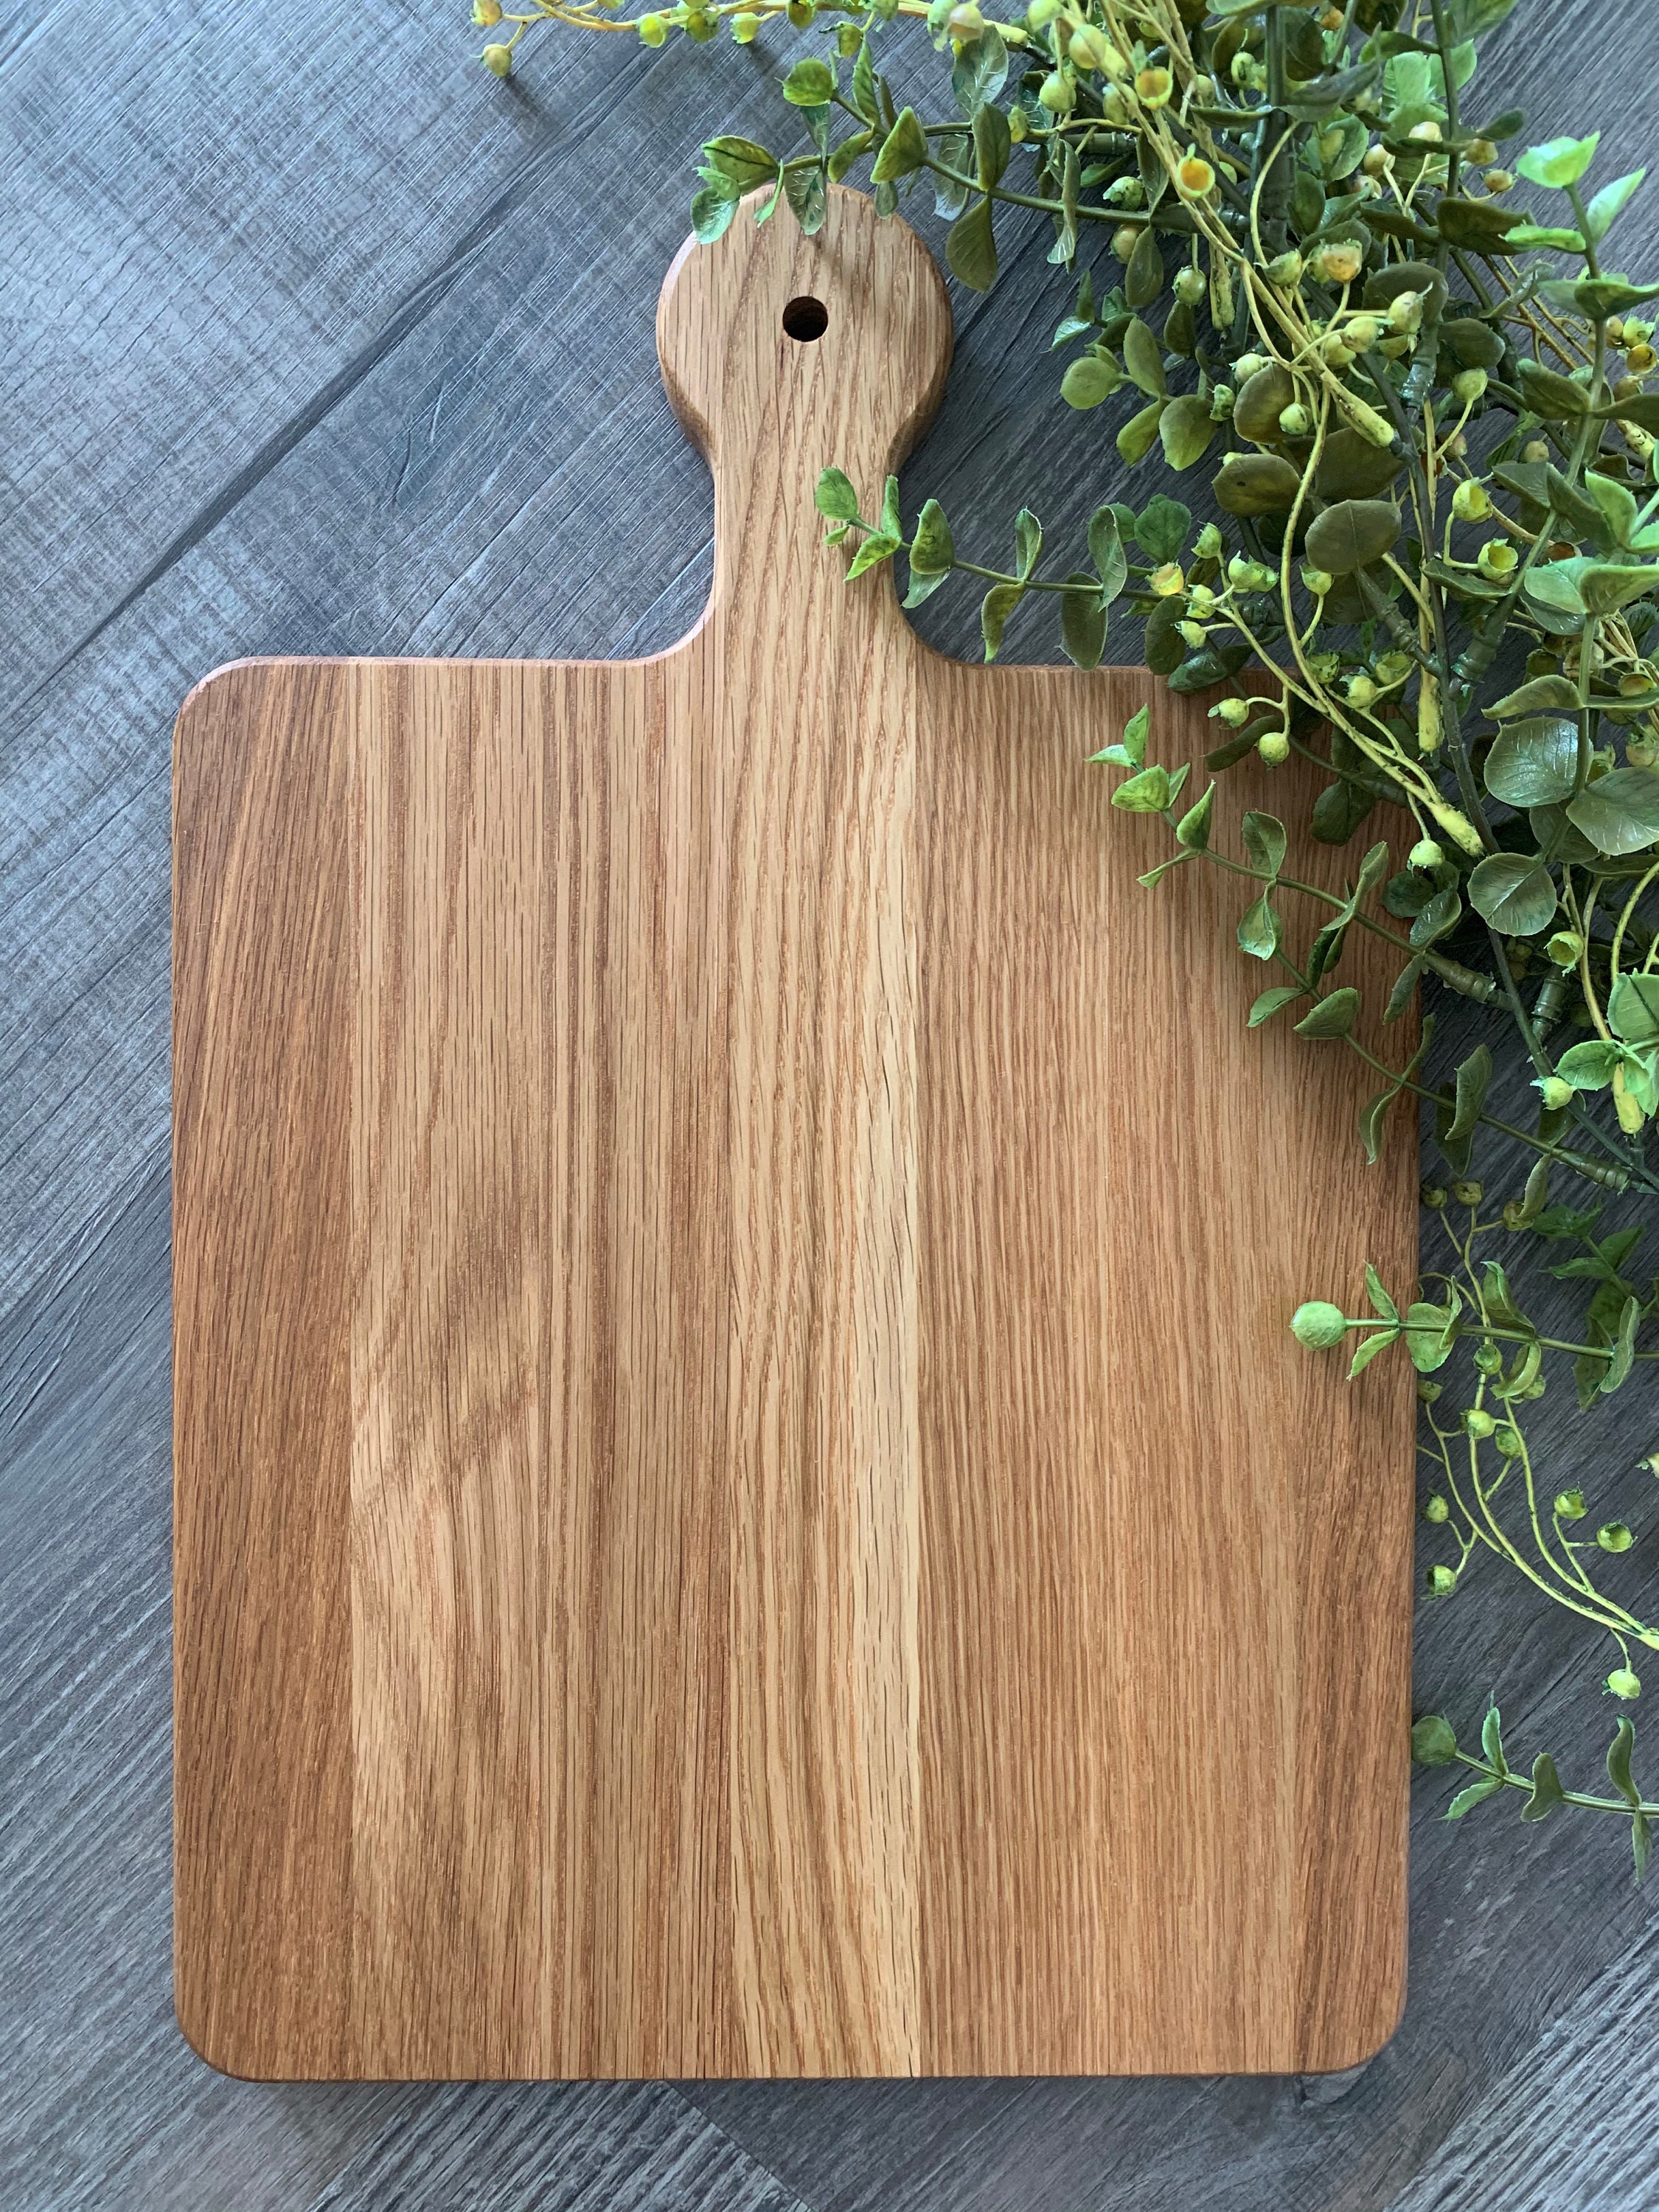 Personalized Cutting Board with Handle - Name on Handle - Gerber